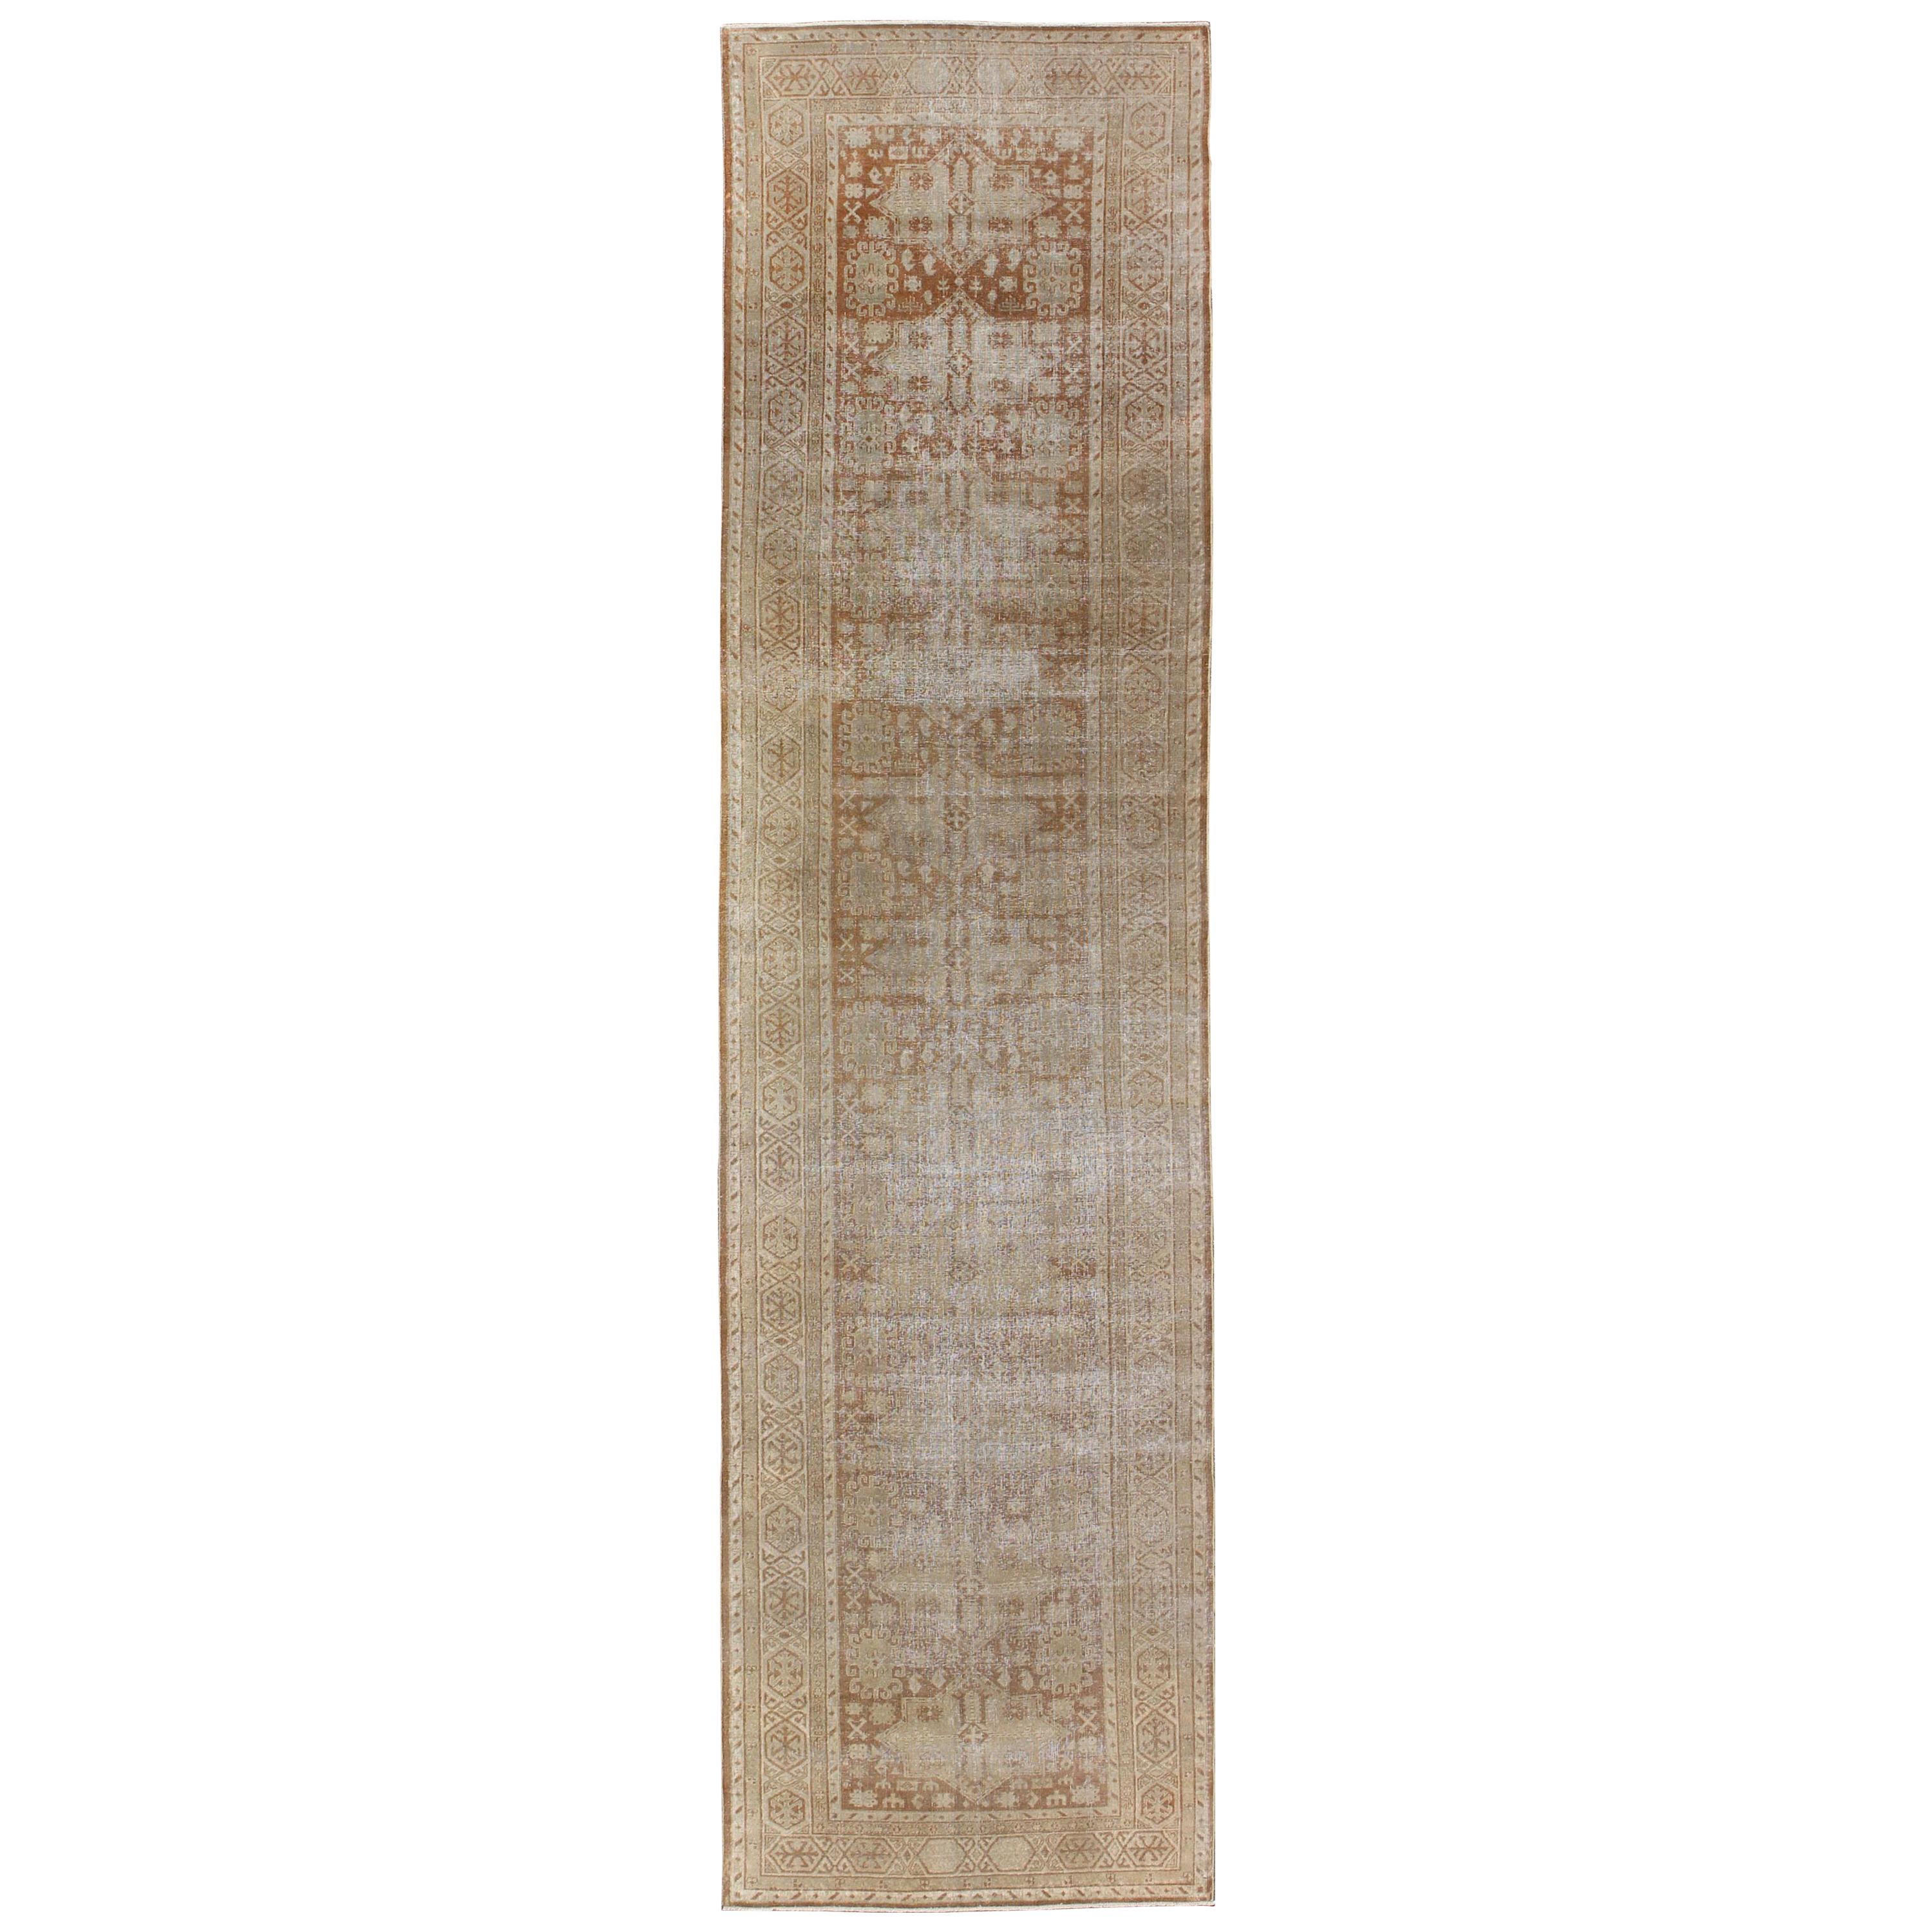 Long Distressed Antique Amritsar Runner in Nude, Taupe, Camel and Neutrals